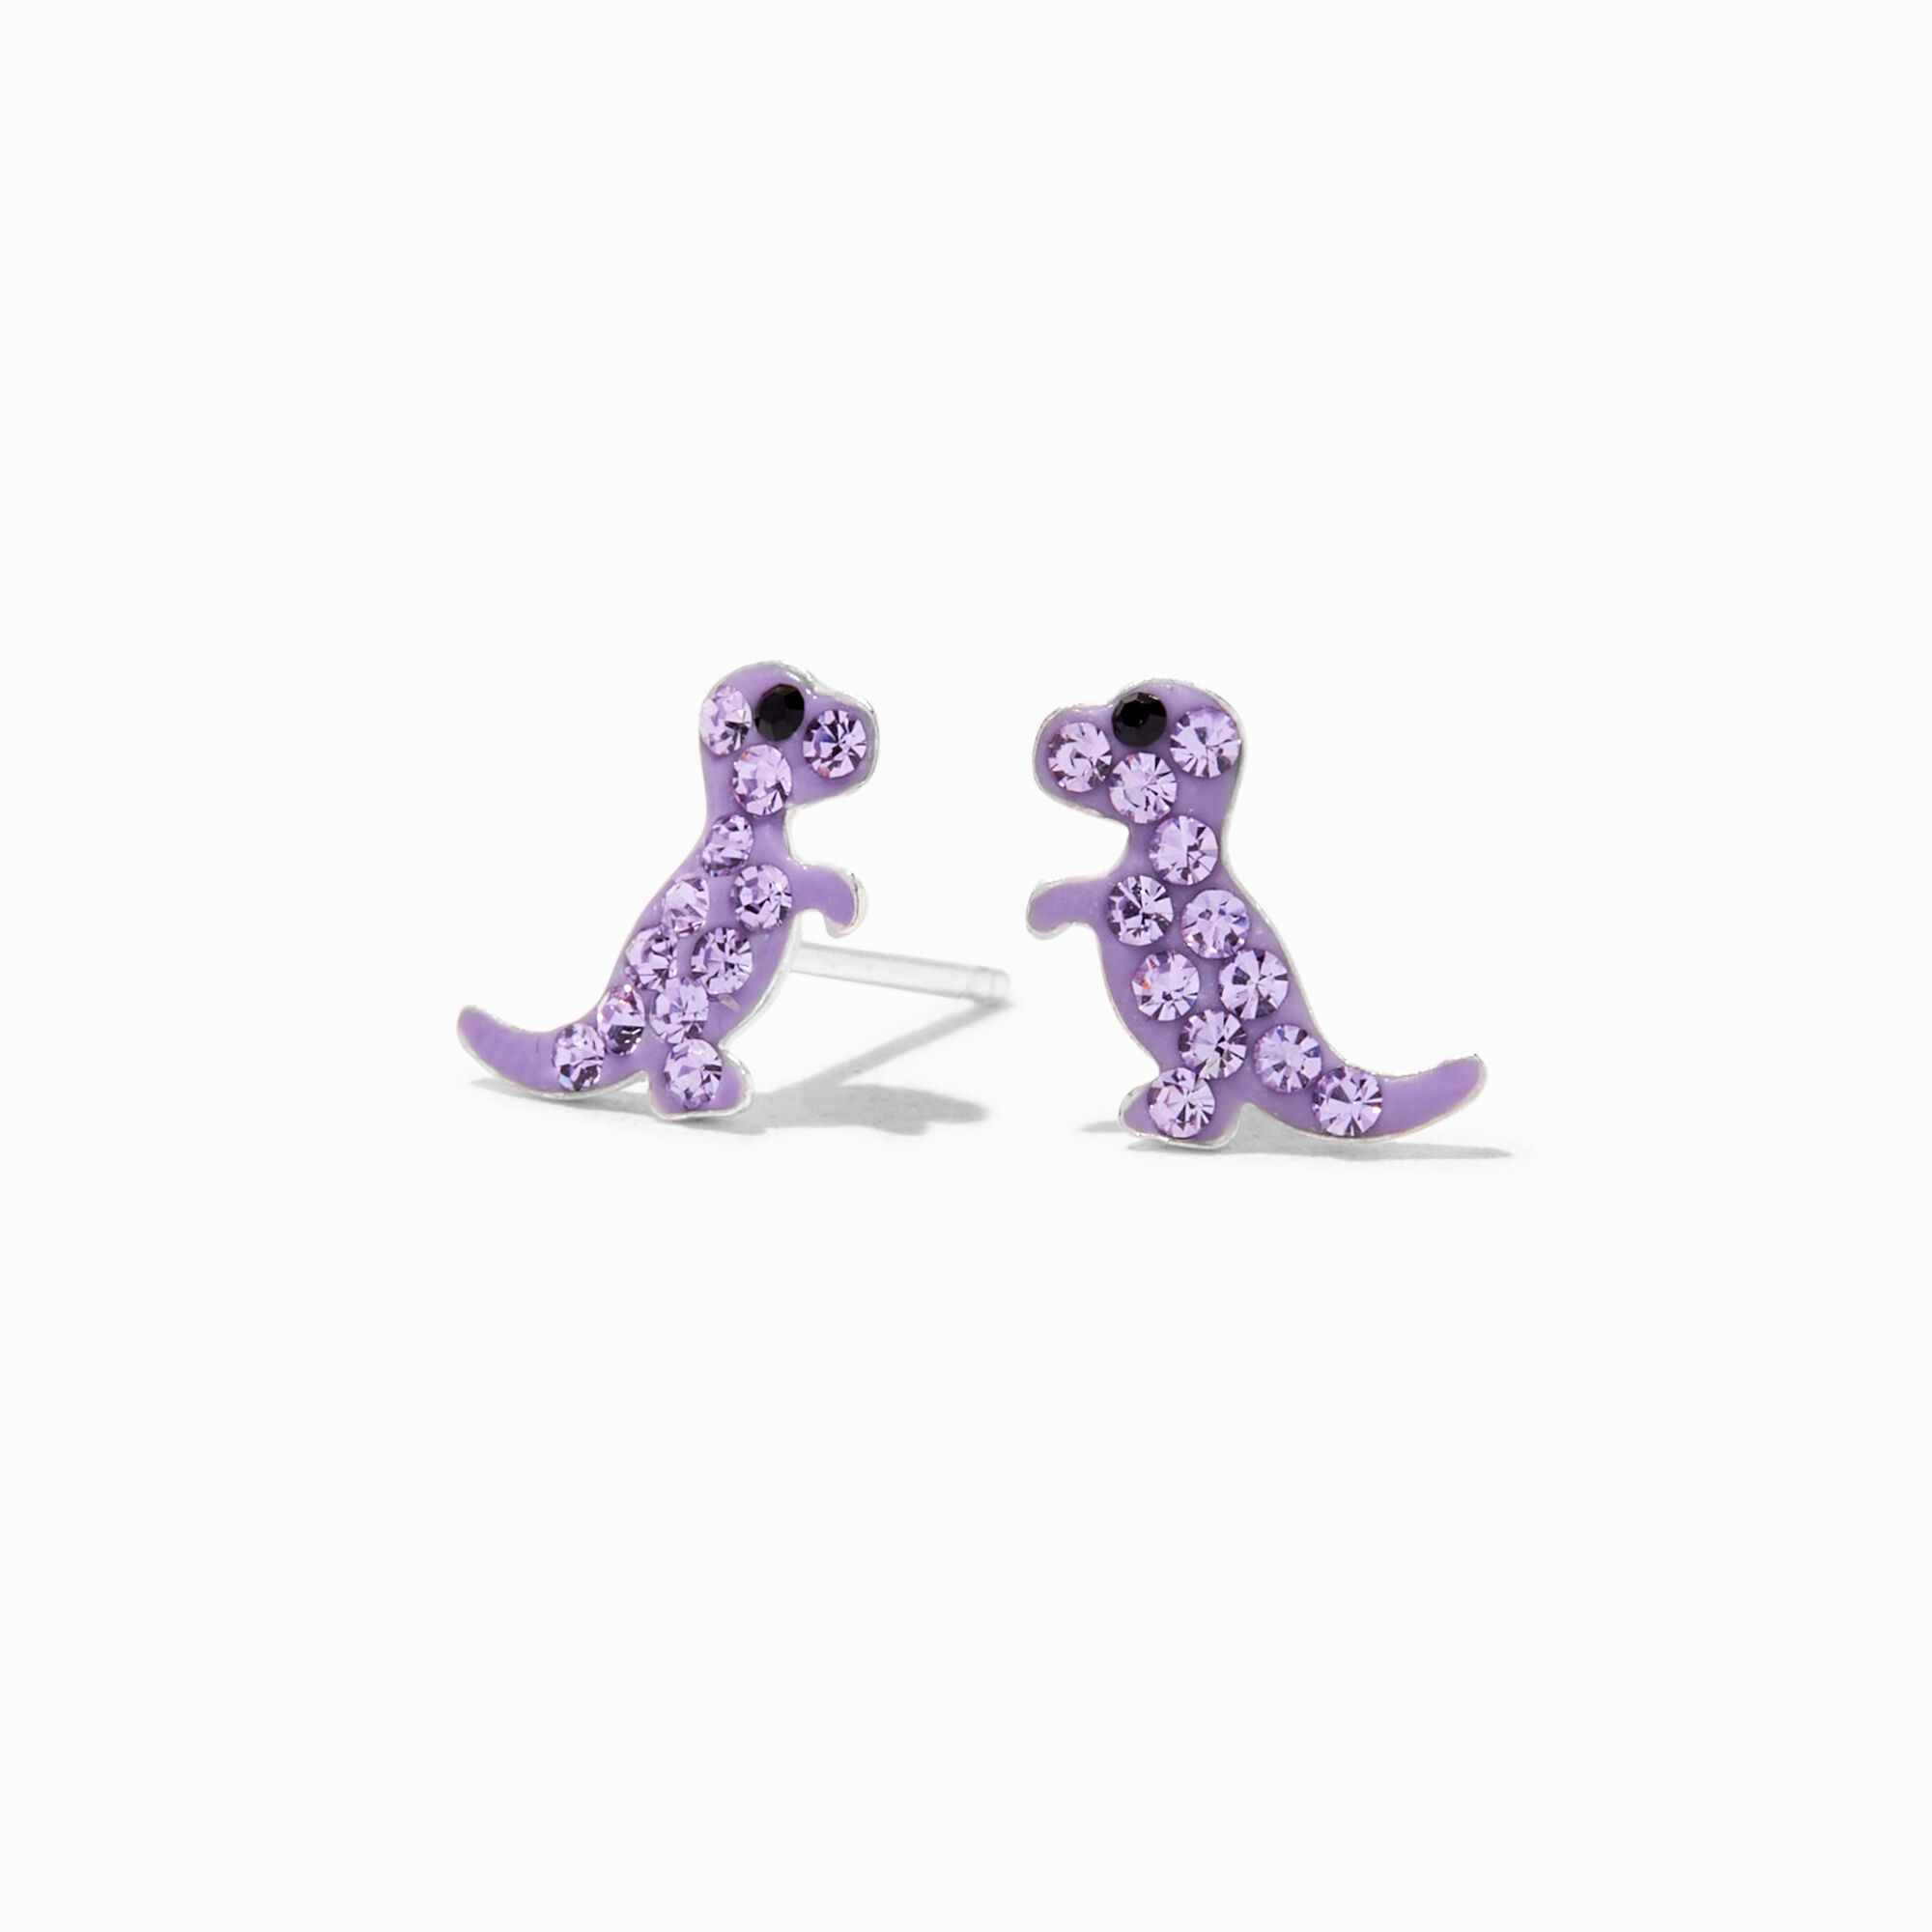 View Claires Purple Dinosaur Stud Earrings Silver information